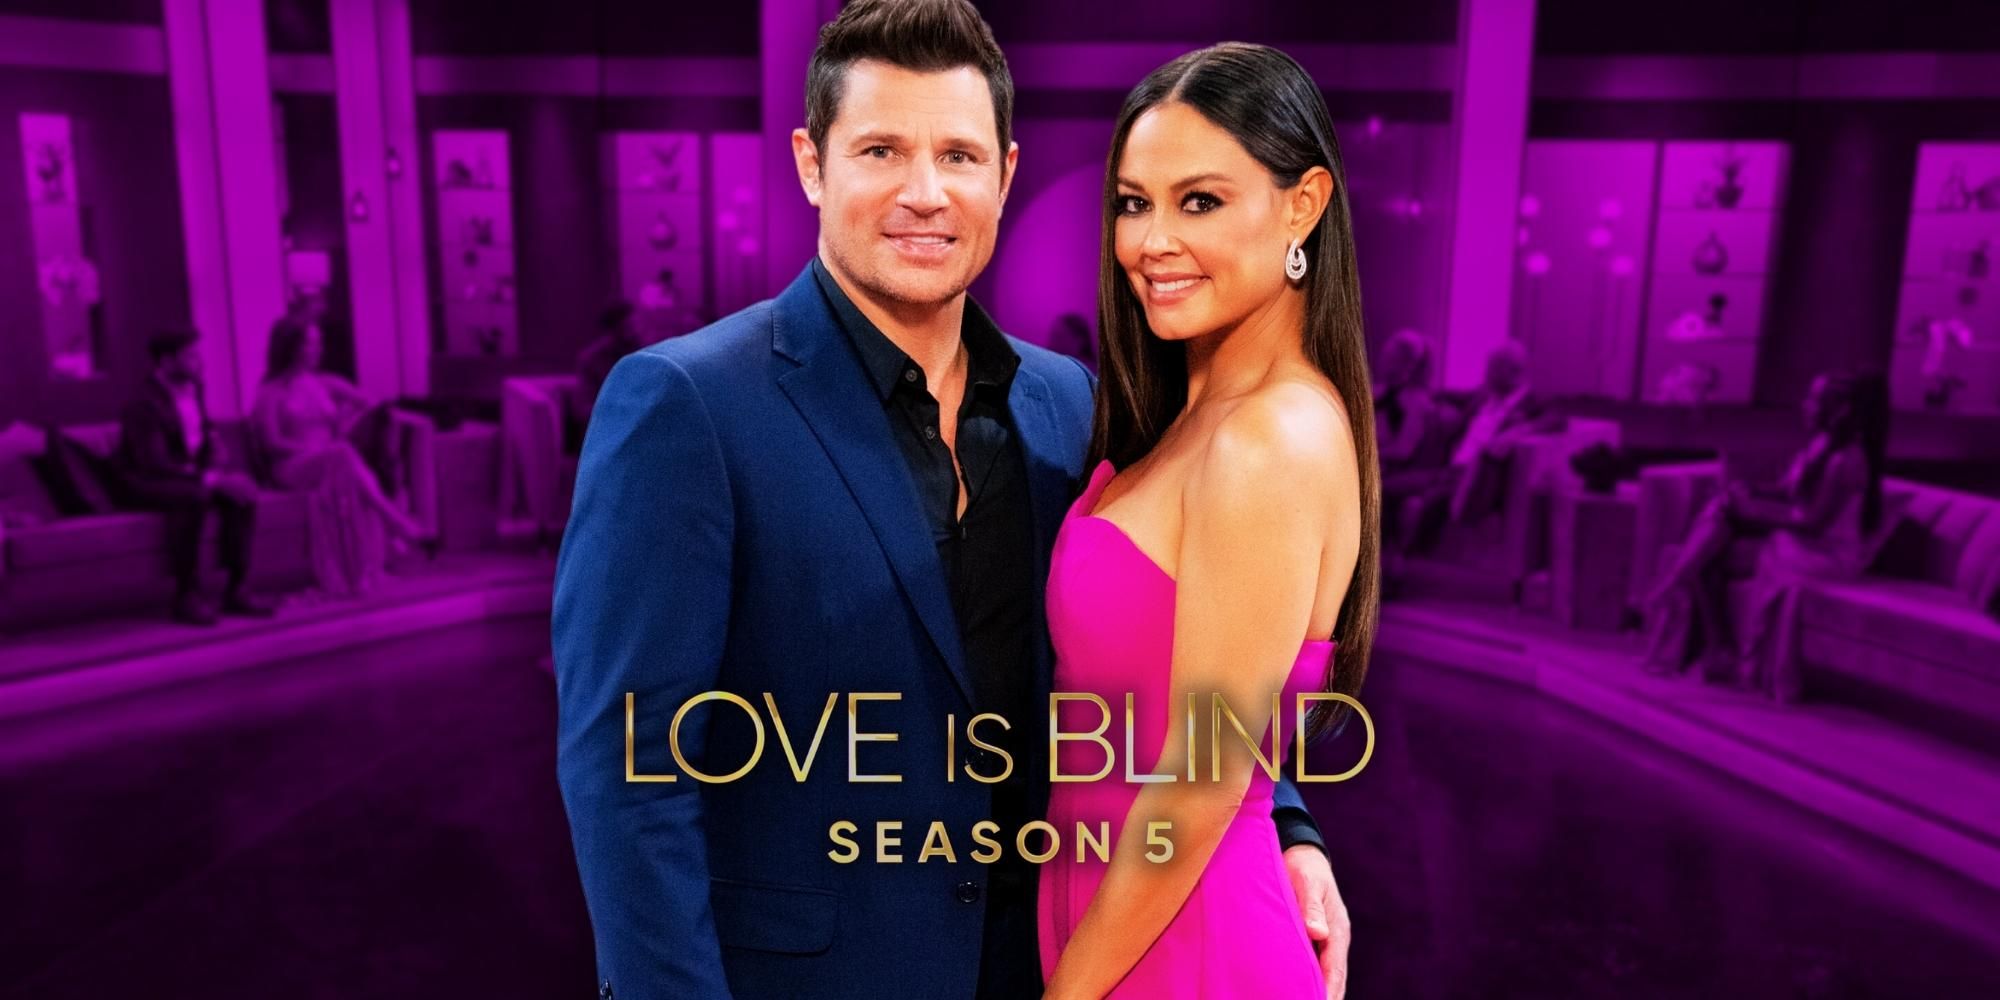 Love Is Blind hosts Nick and Vanessa Lachey smiling